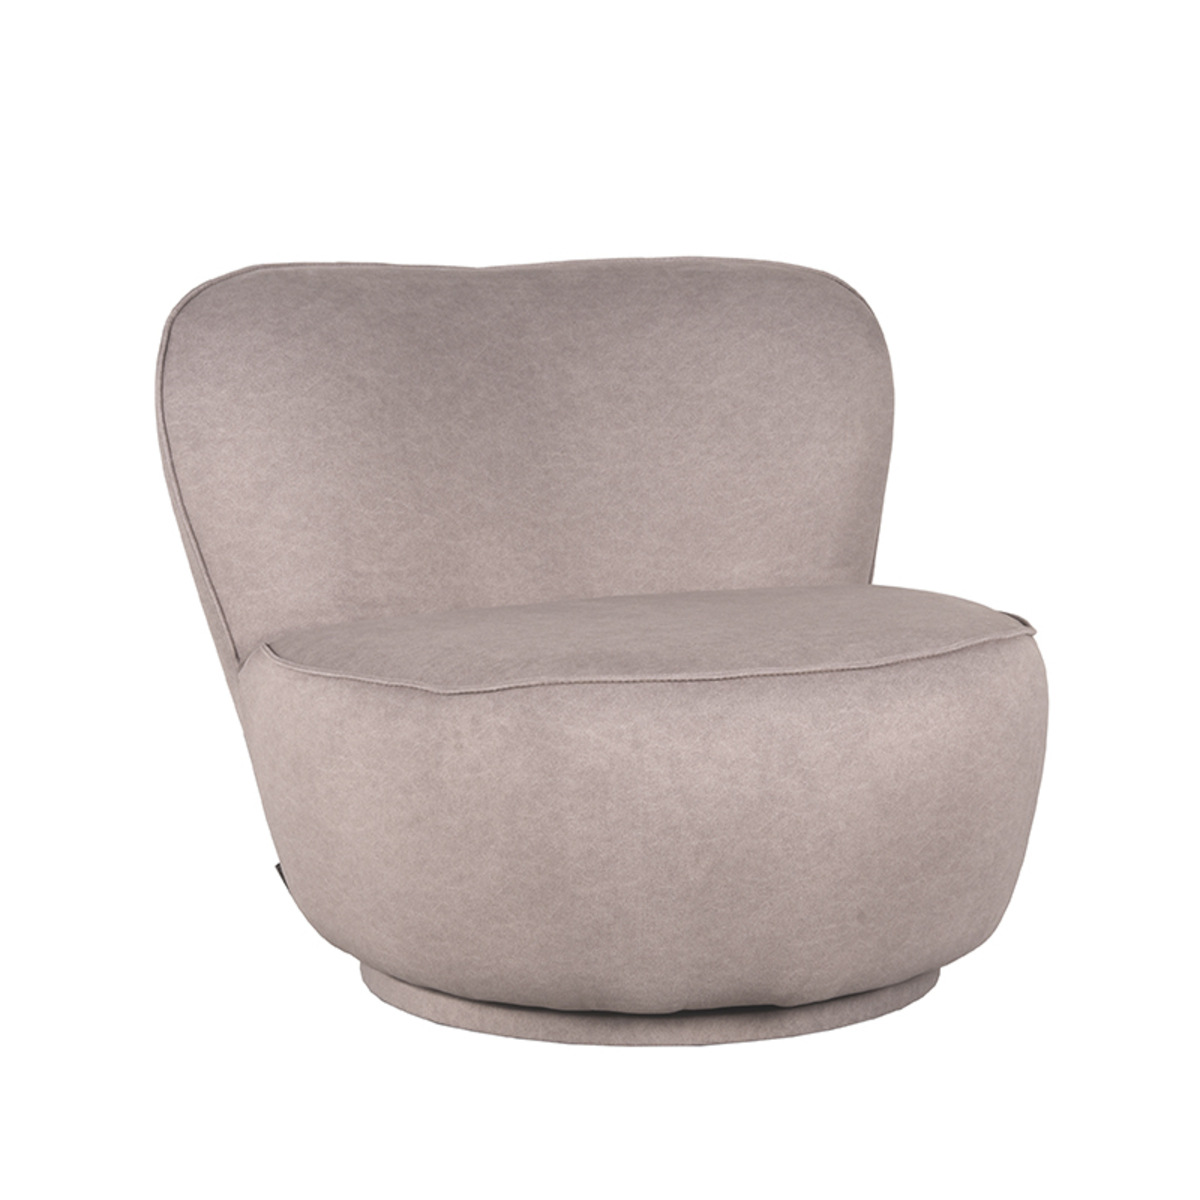  Fauteuil Bunny - Taupe - Explore afbeelding 1